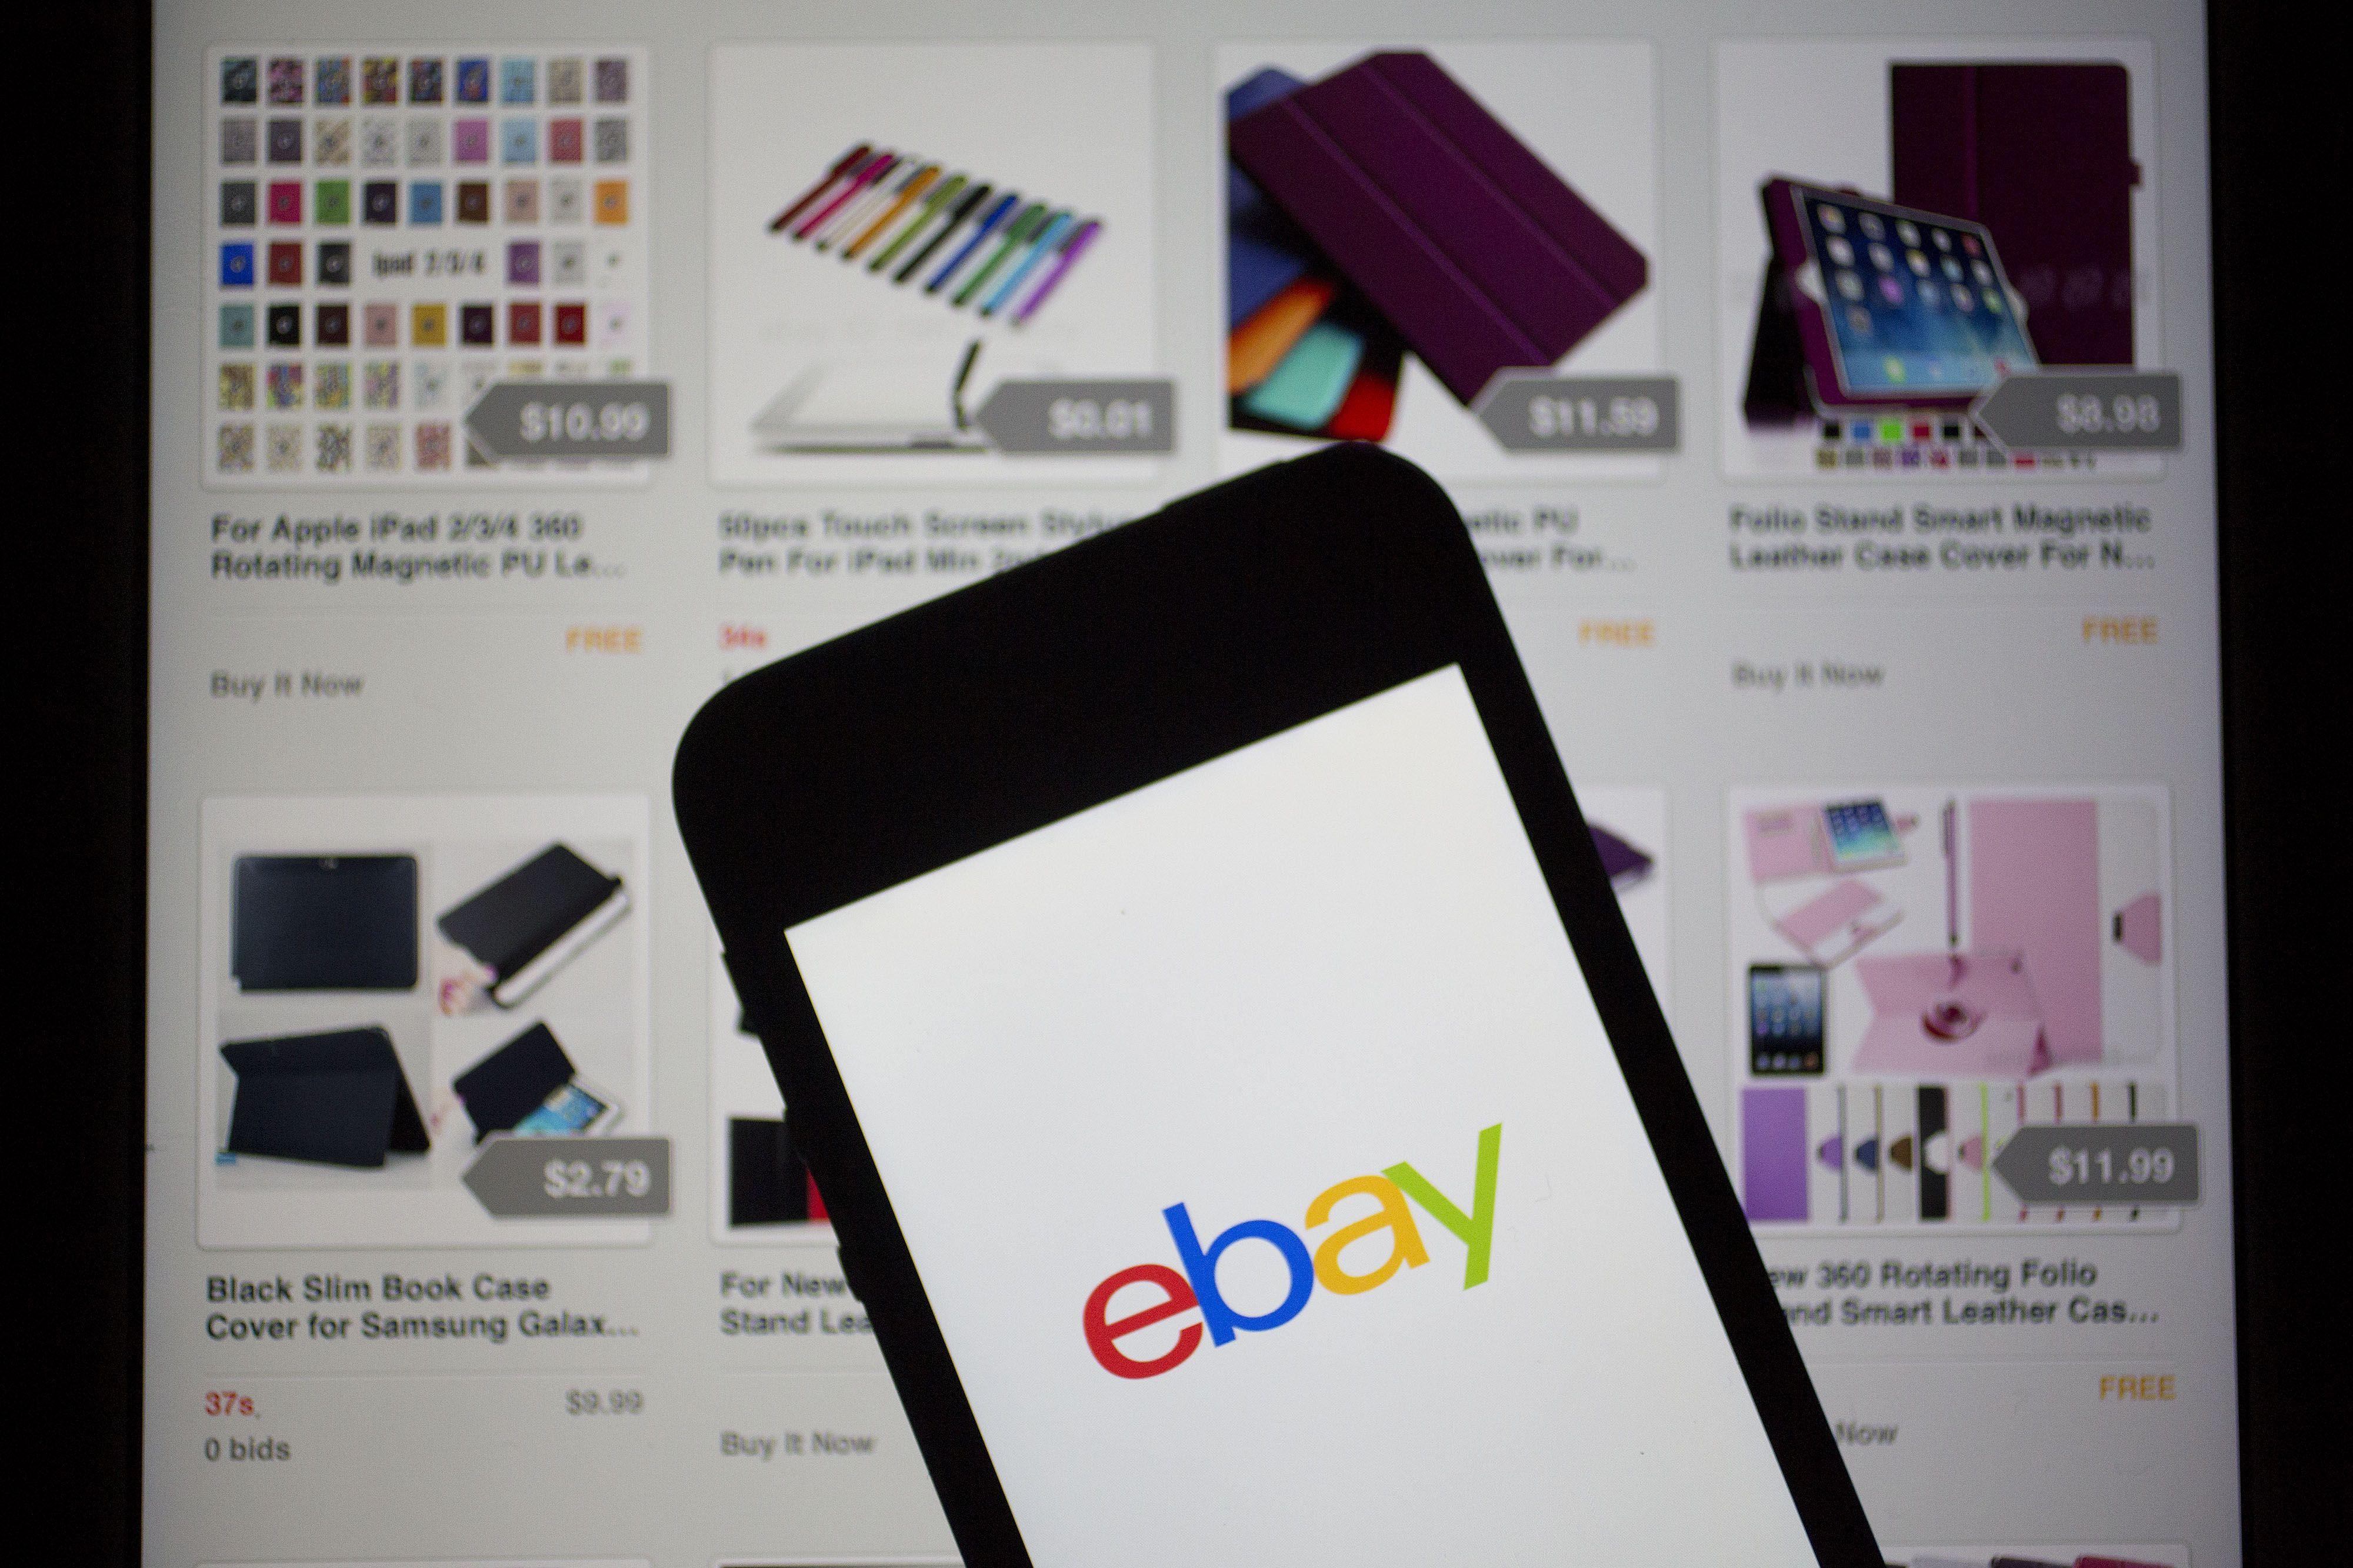 eBay Inc. Logo - Apple Is Selling Old iPhones for Cheap on eBay